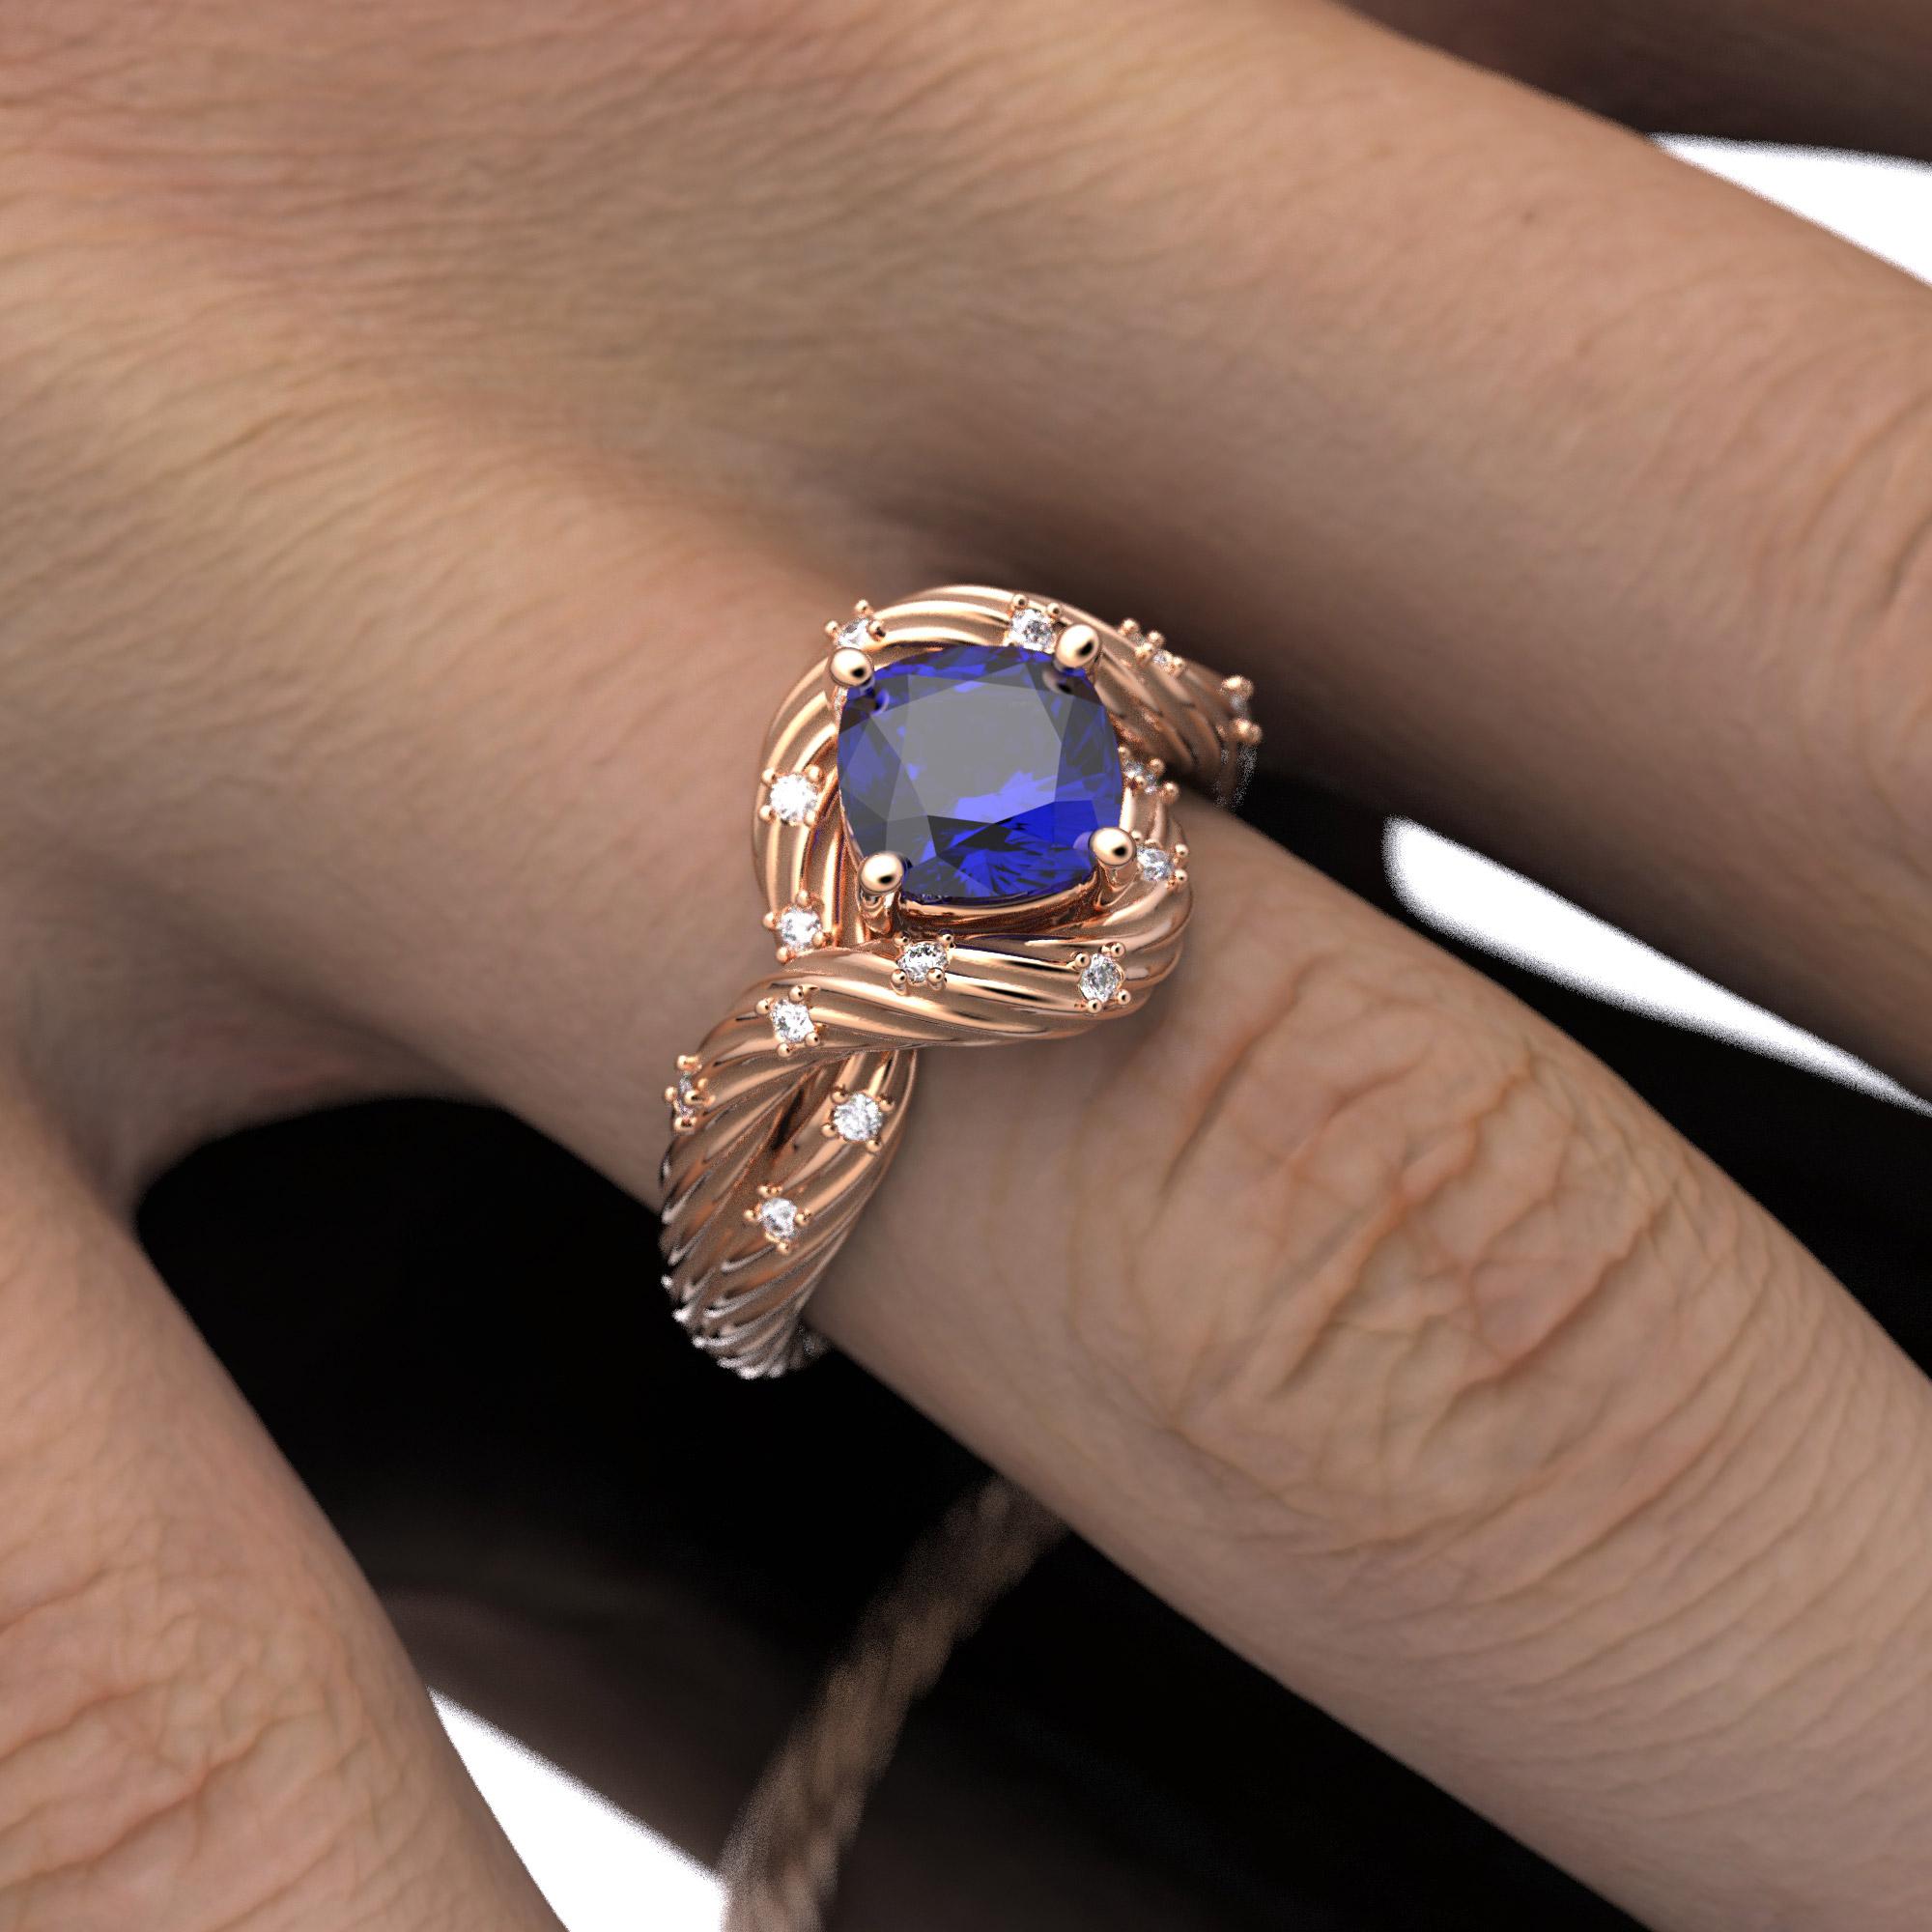 For Sale:  Tanzanite and Diamonds Ring 14k Solid Gold, Italian Fine Jewelry, made to order. 11